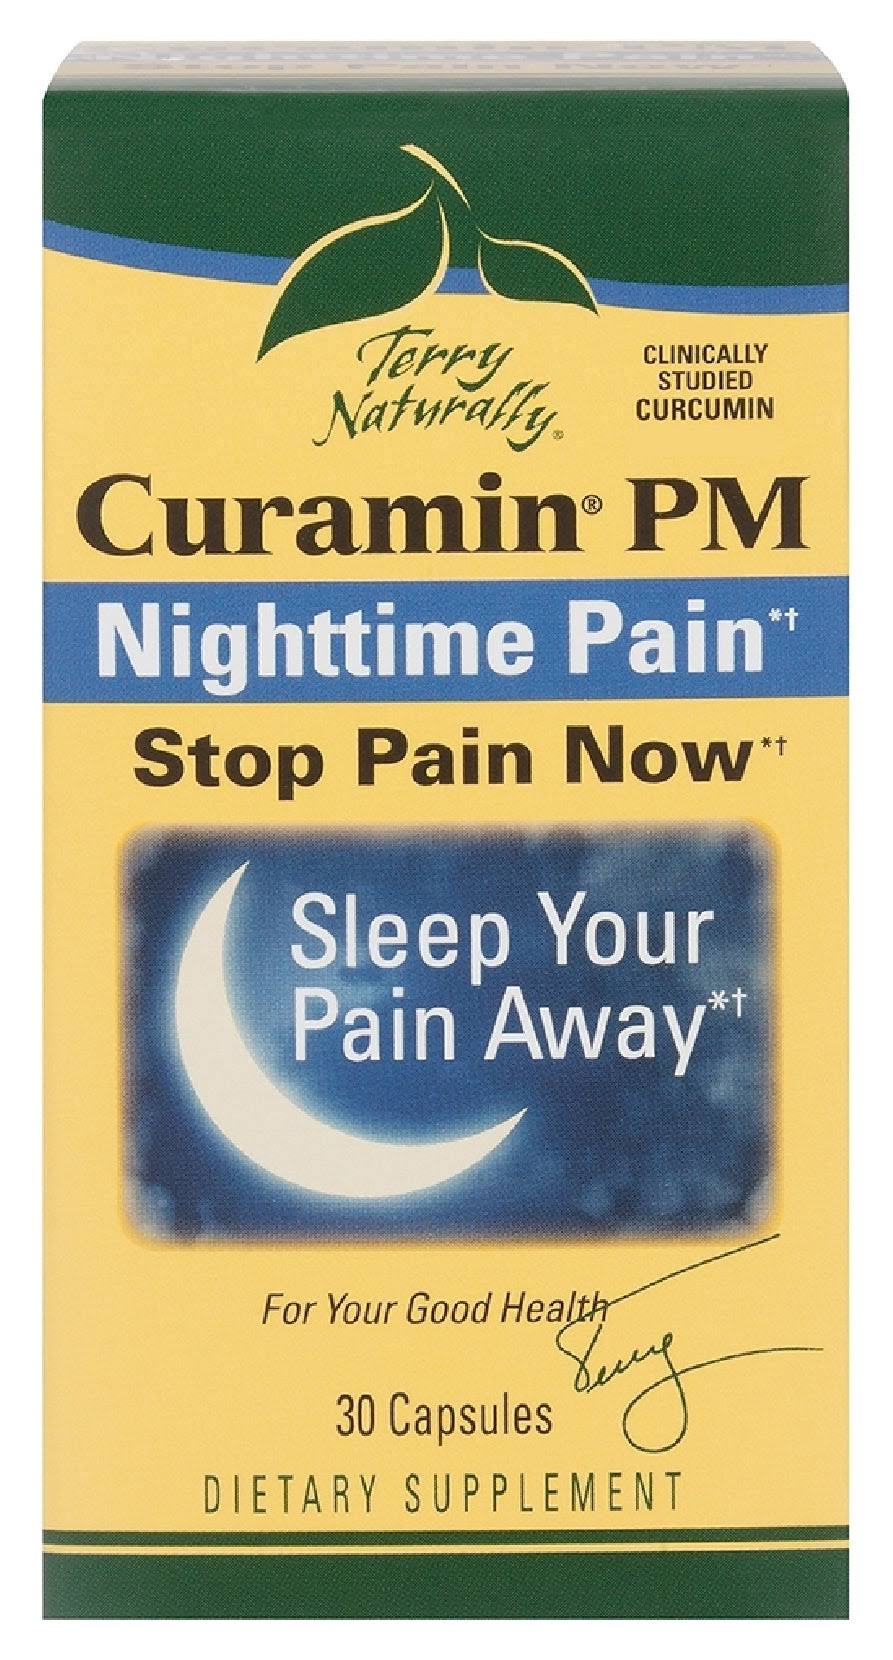 Terry Naturally Curamin PM Nighttime Pain Relief